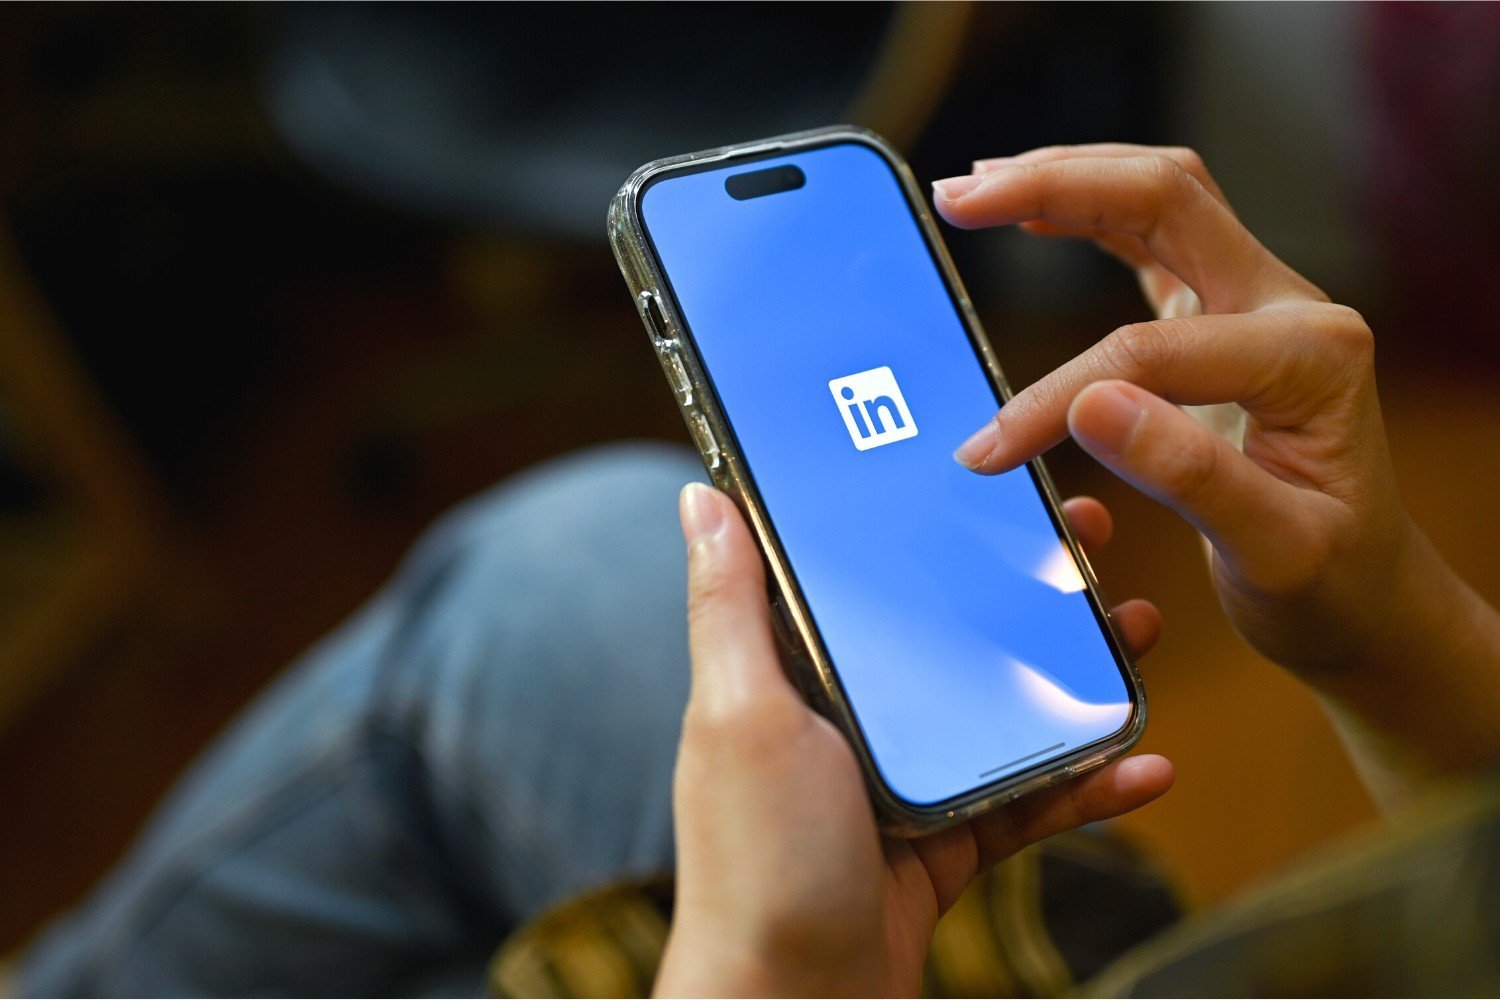 200+ Questions to Ask a LinkedIn Connection